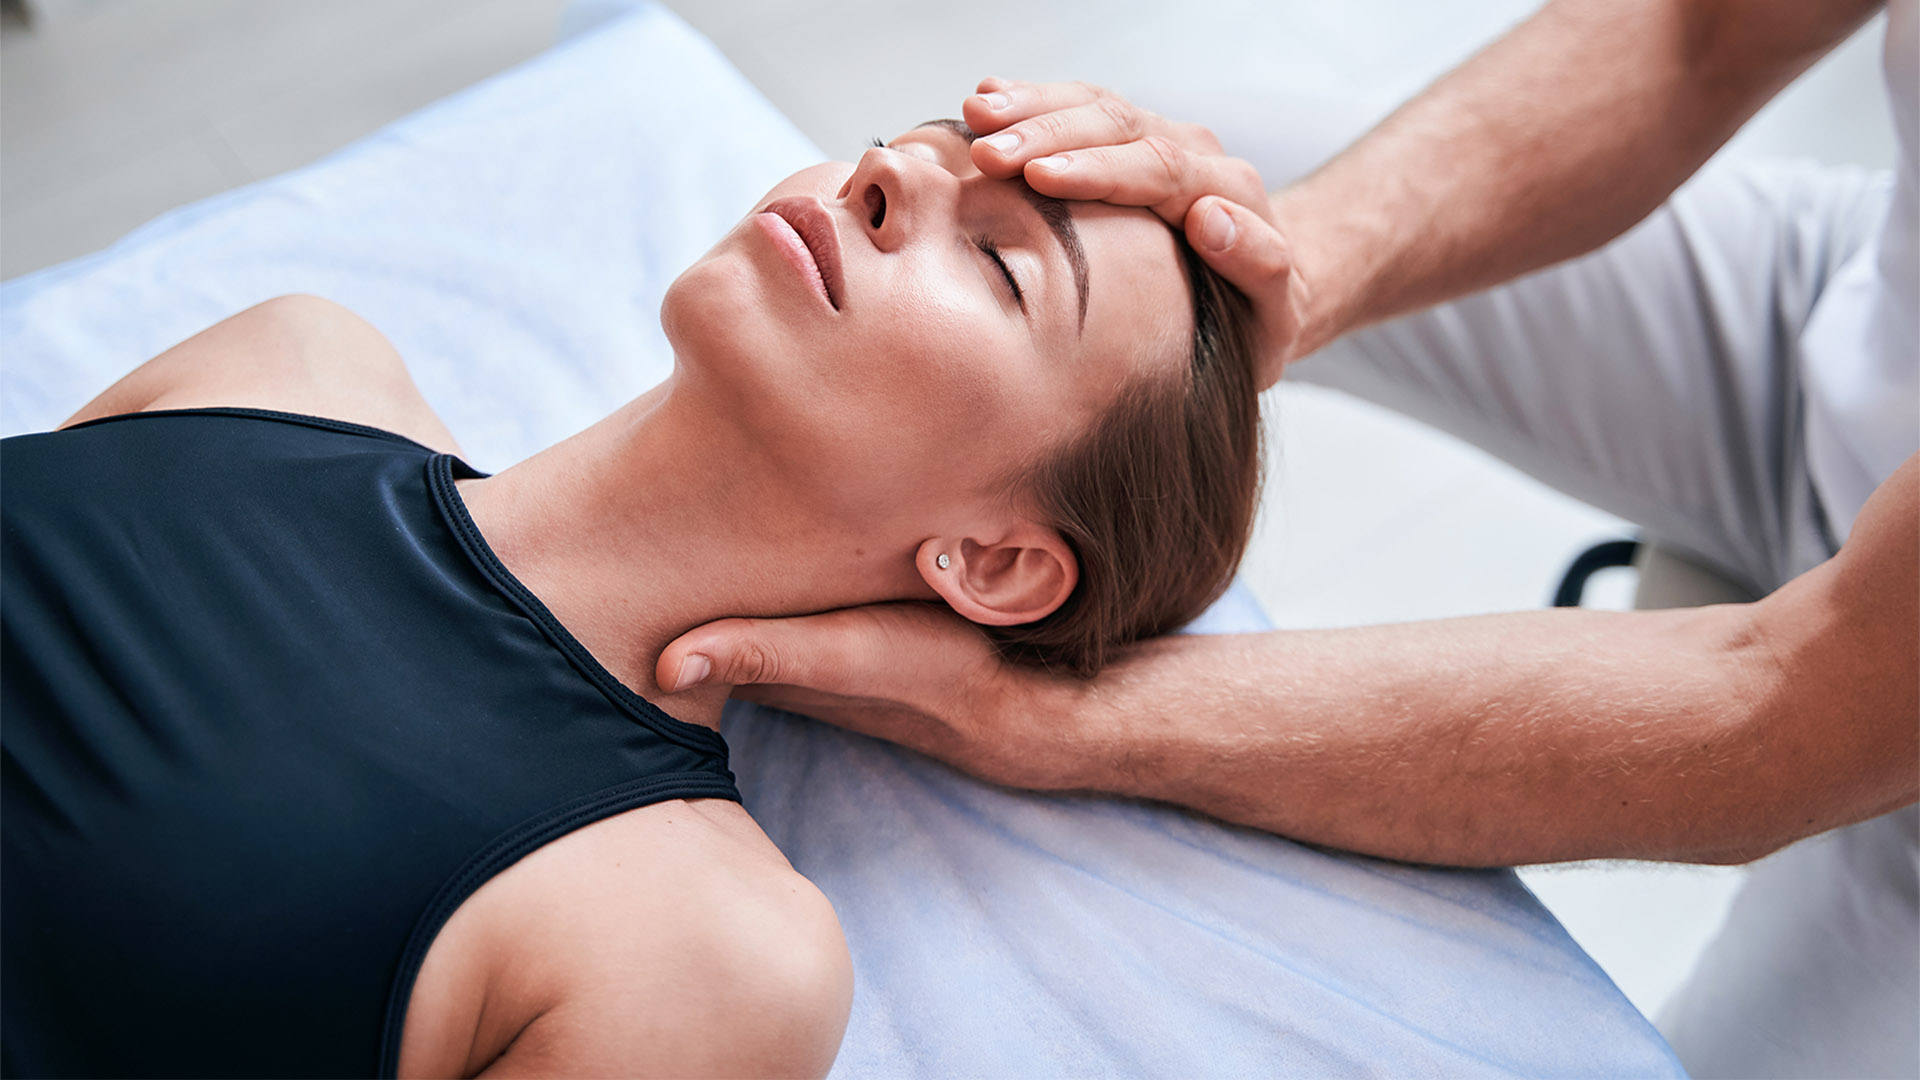 Chiropractic: Great for Neck Pain Recovery